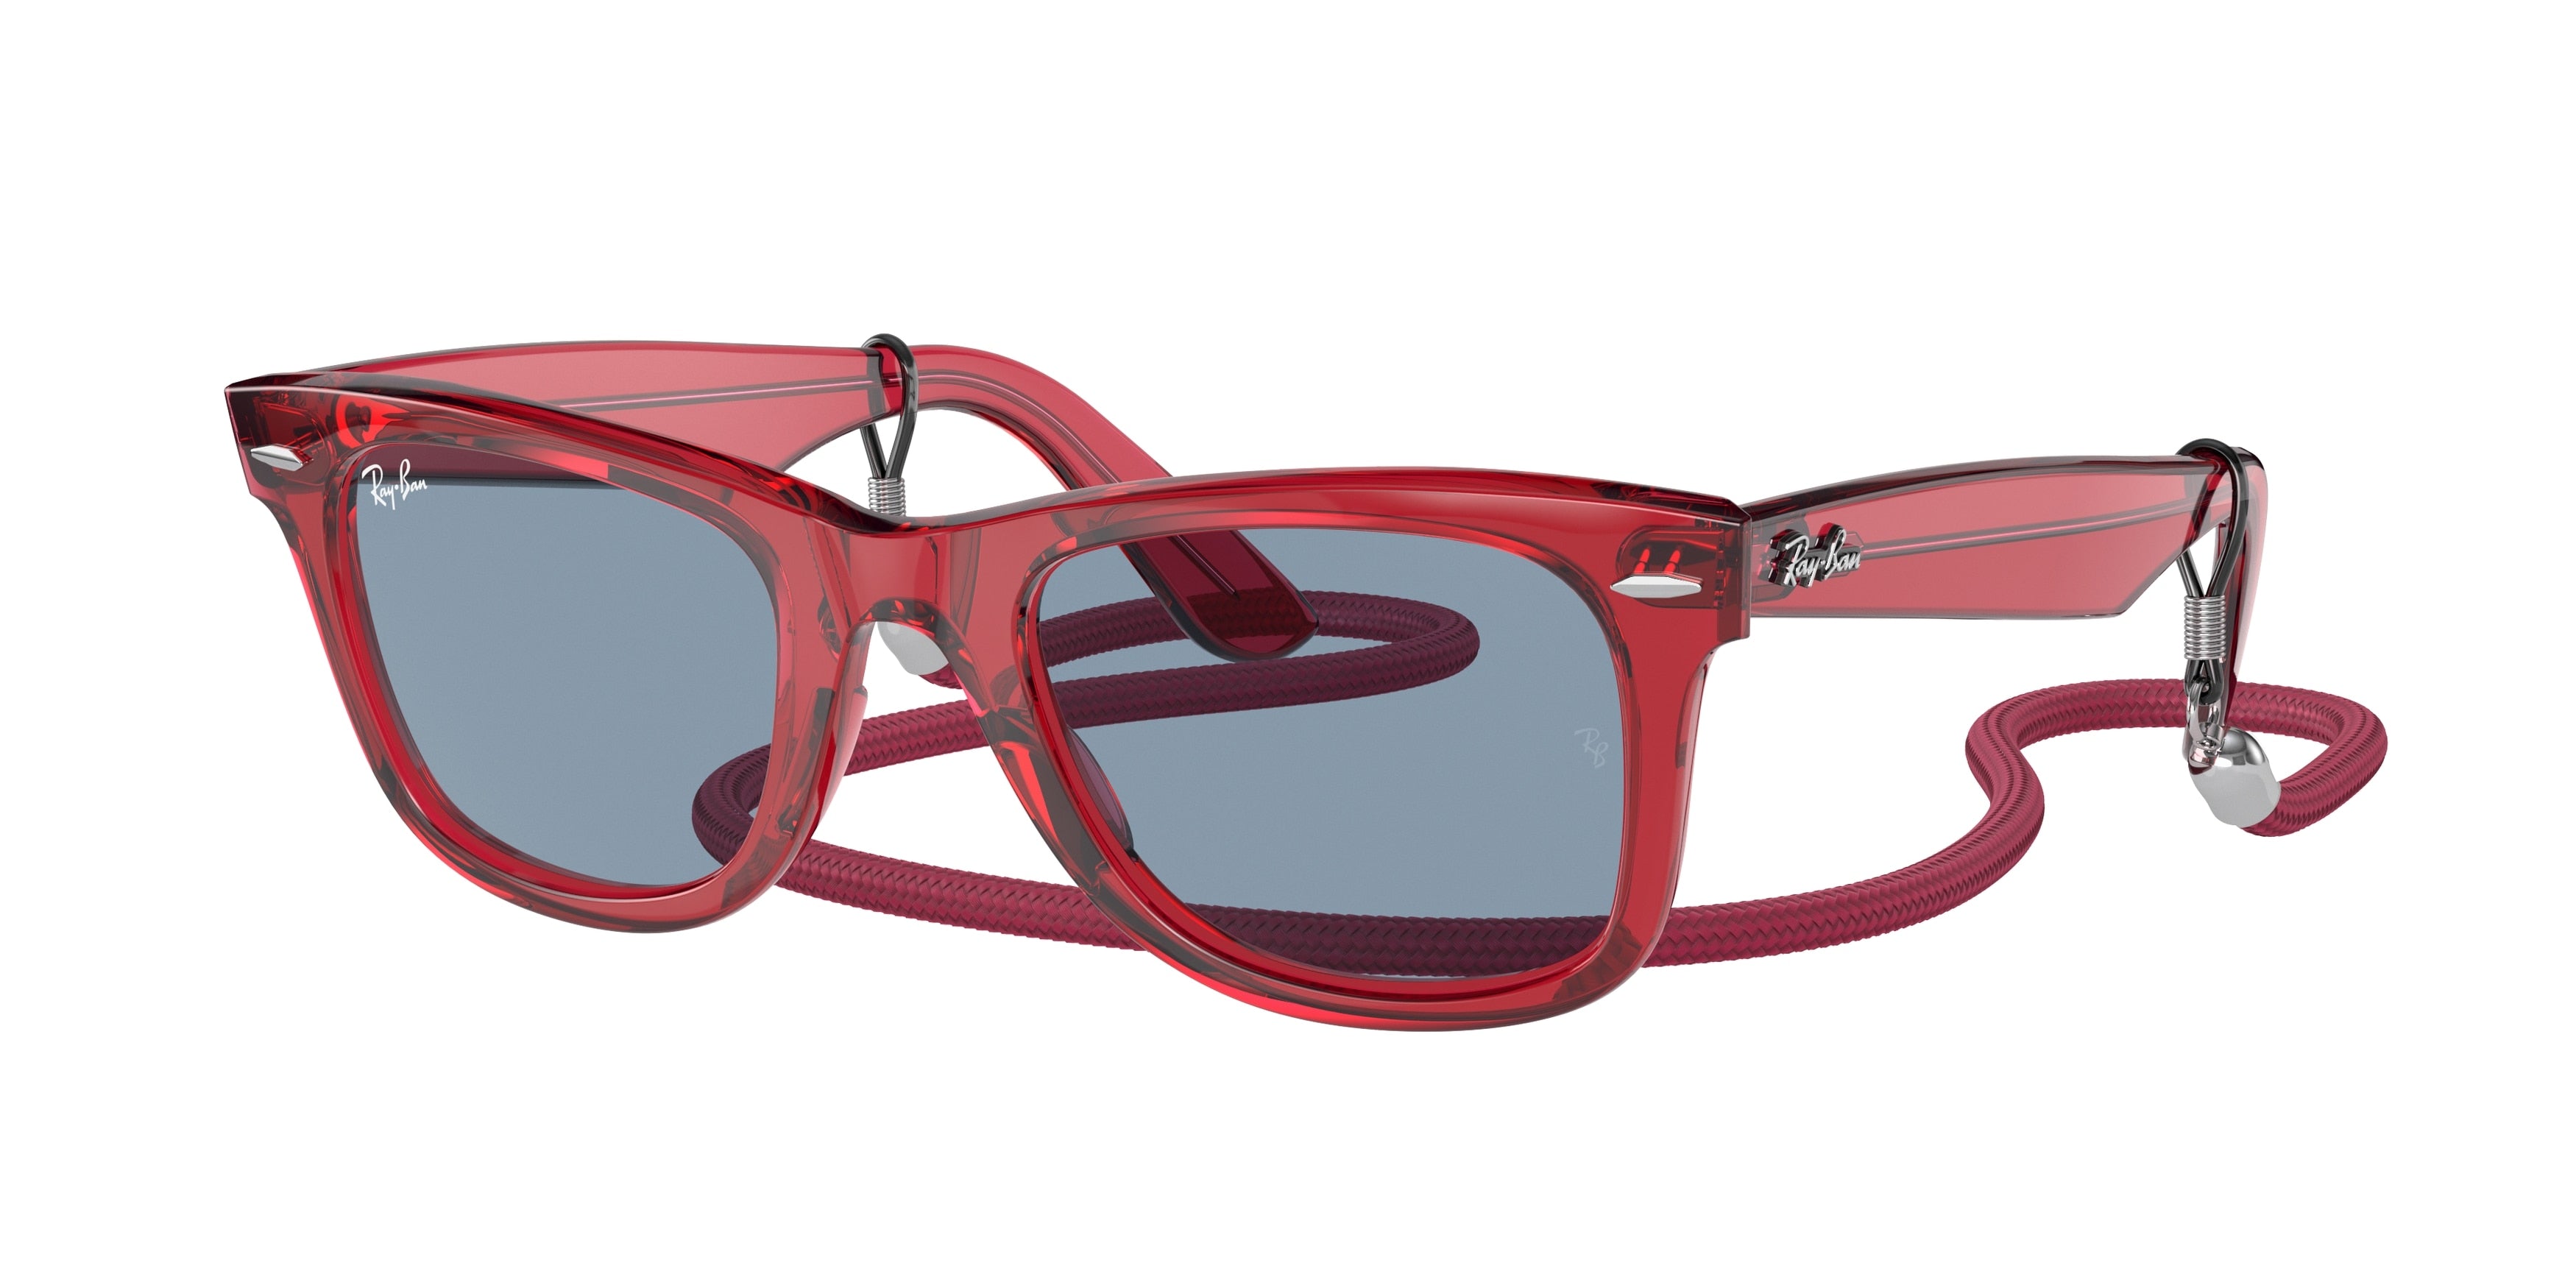 Ray-Ban WAYFARER RB2140 Square Sunglasses  661456-Transparent Red 50-150-22 - Color Map Red